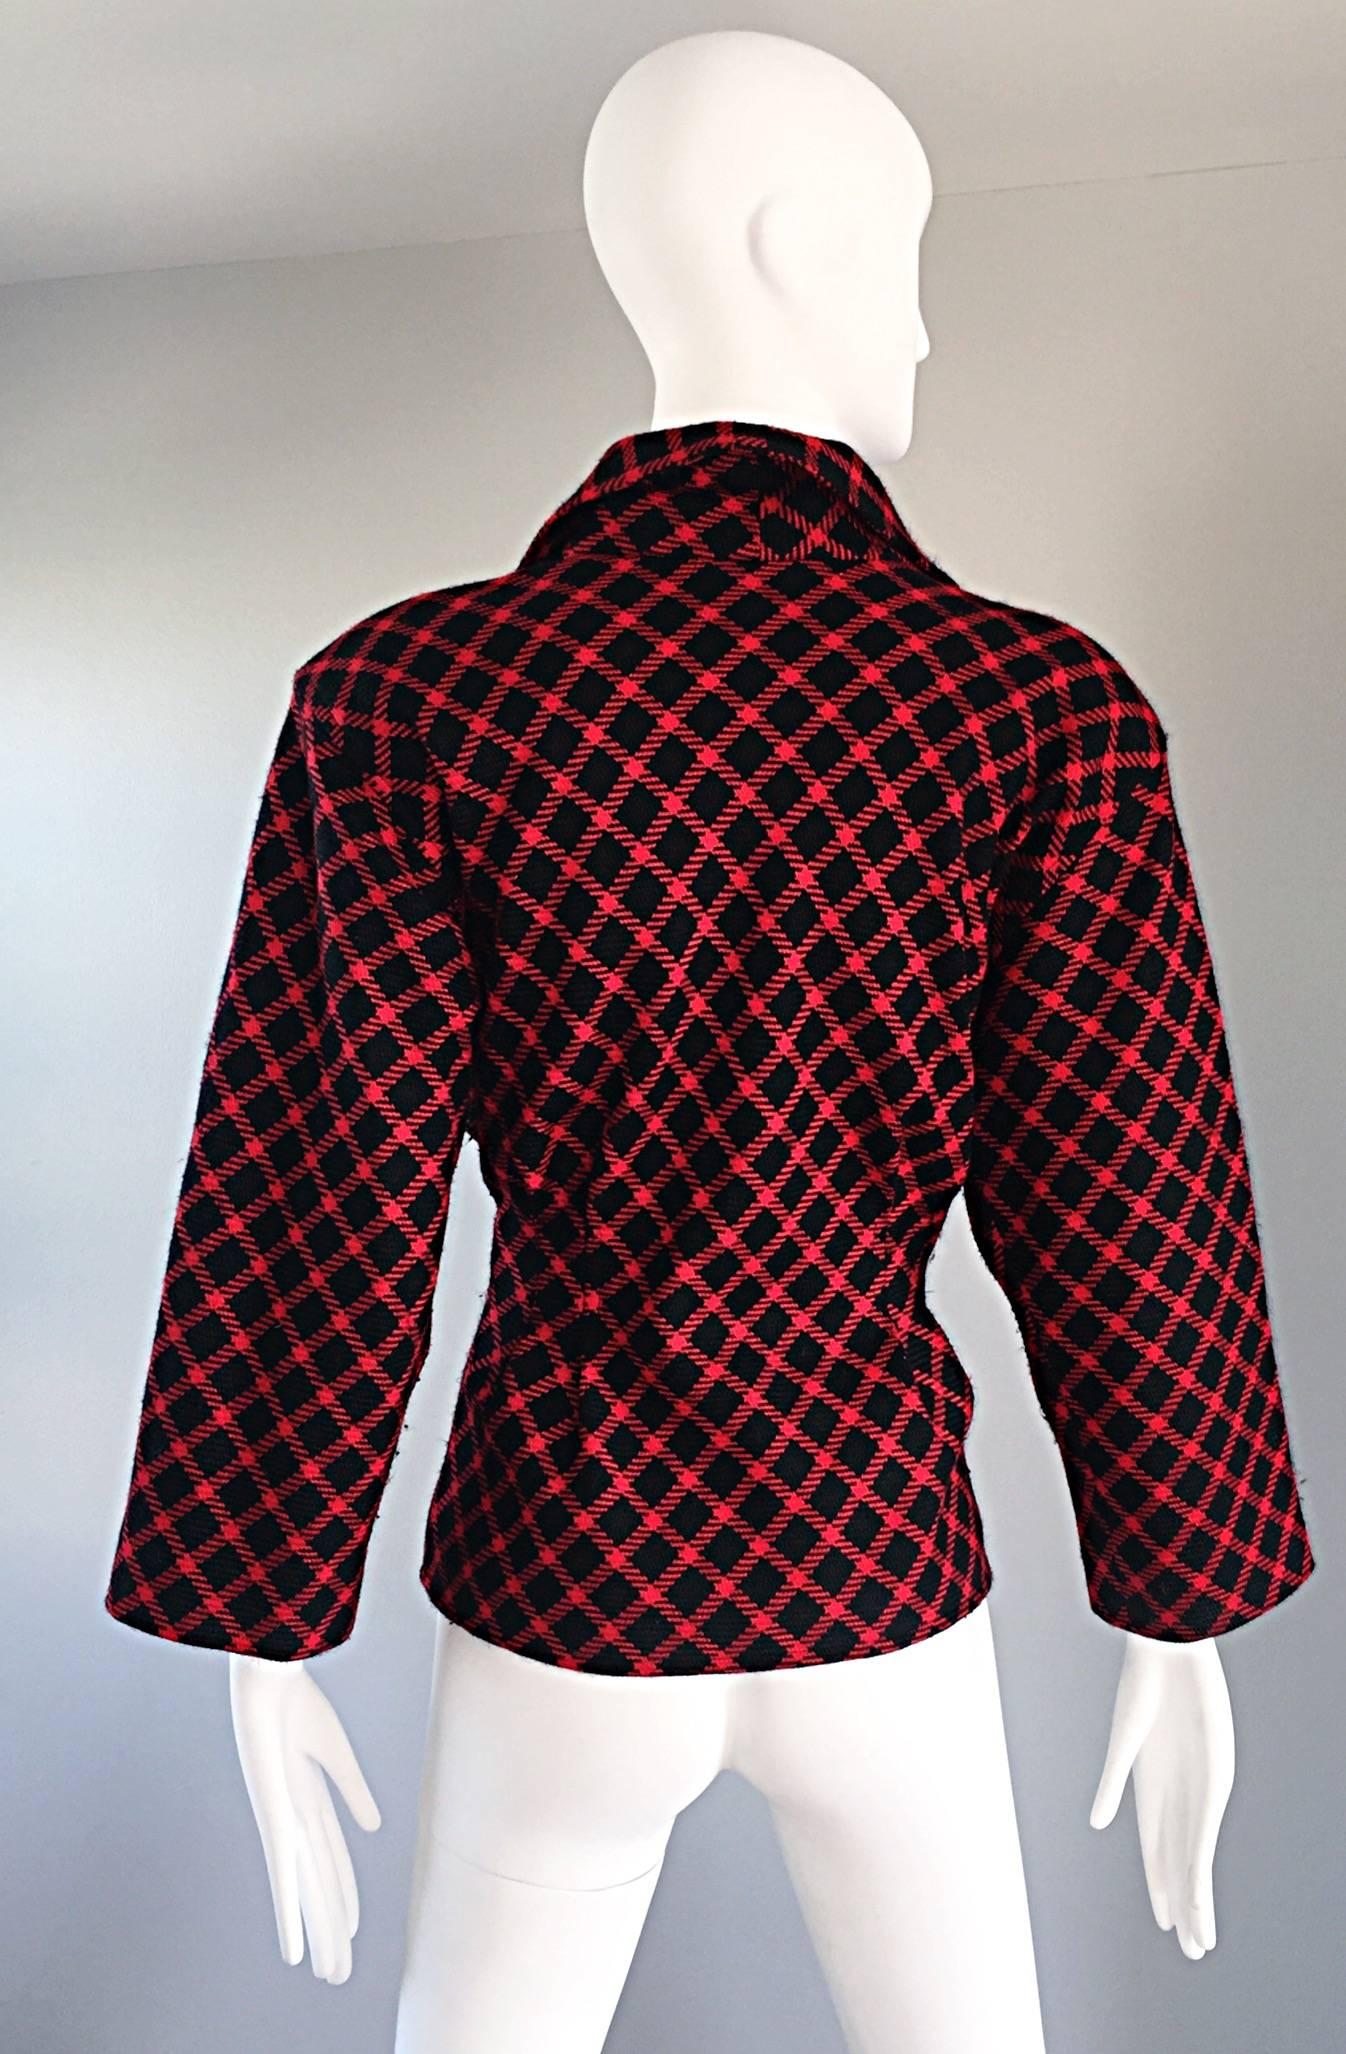 Women's Emanuel Ungaro Vintage 1980s does 1940s Red and Black Plaid Wasp Waist Jacket 8